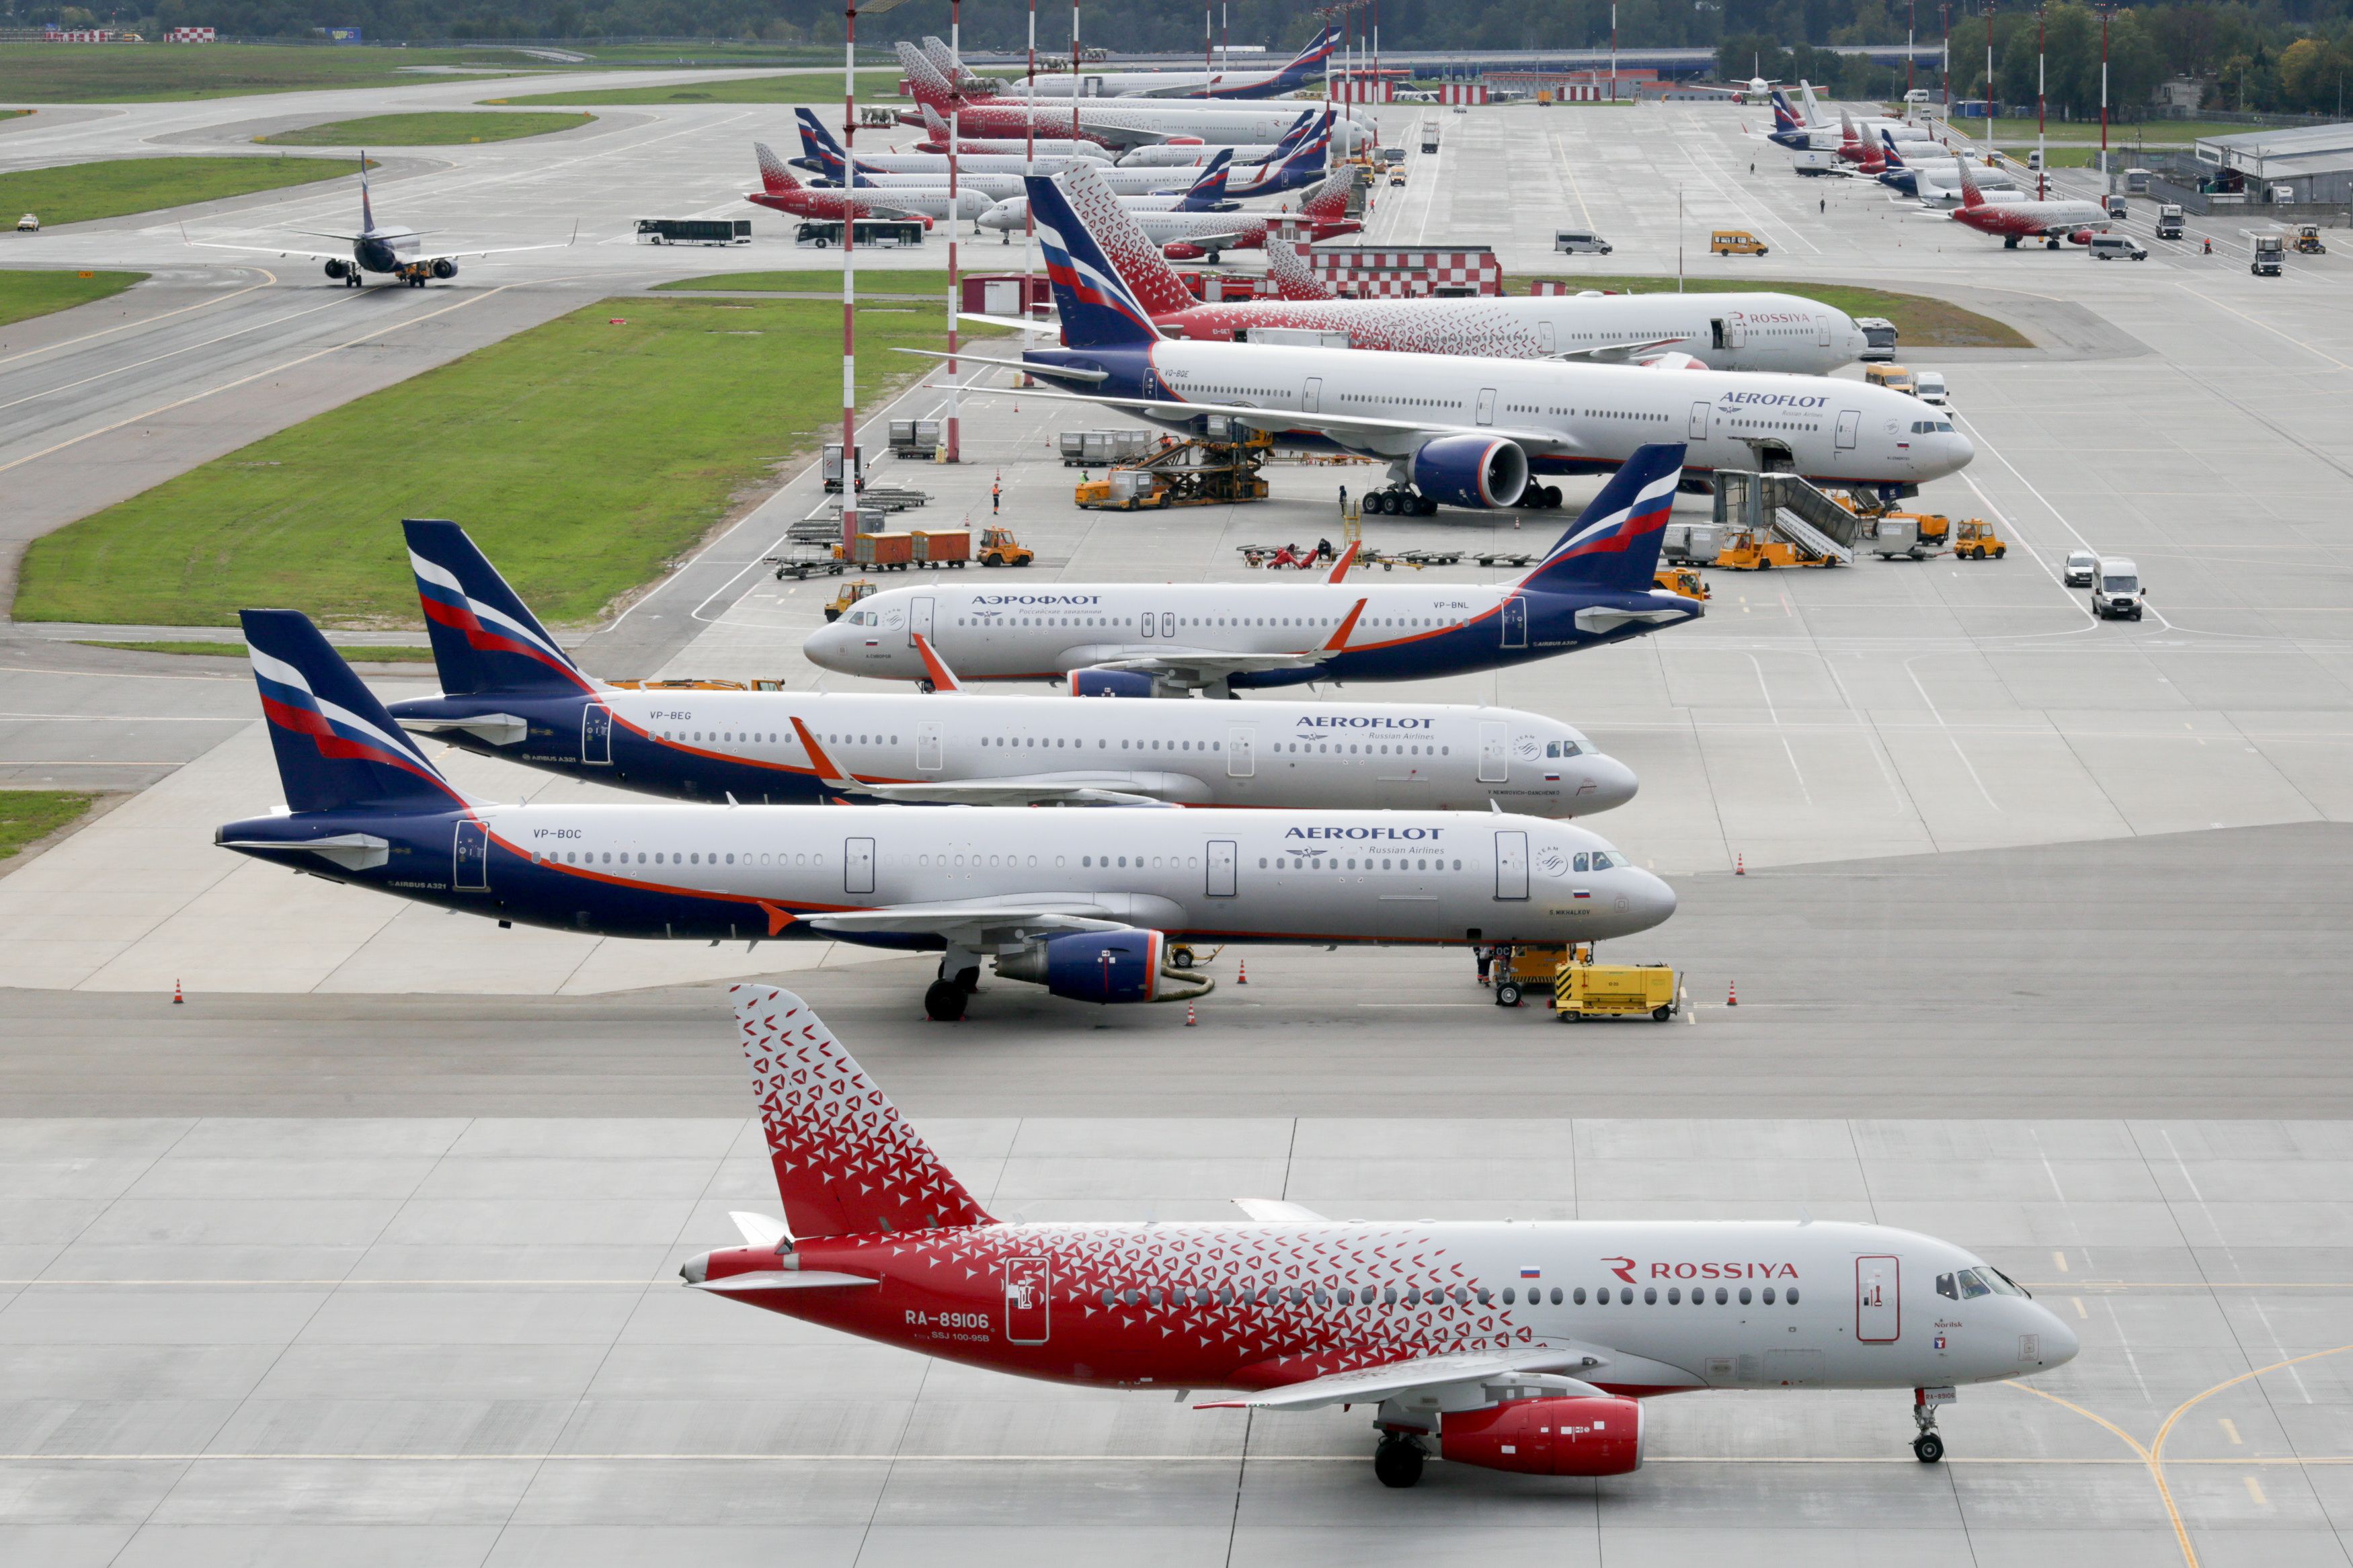 Aeroflot Russian Airlines and Rossiya Airlines jet aircrafts at Moscow-Sheremetyevo International Airport